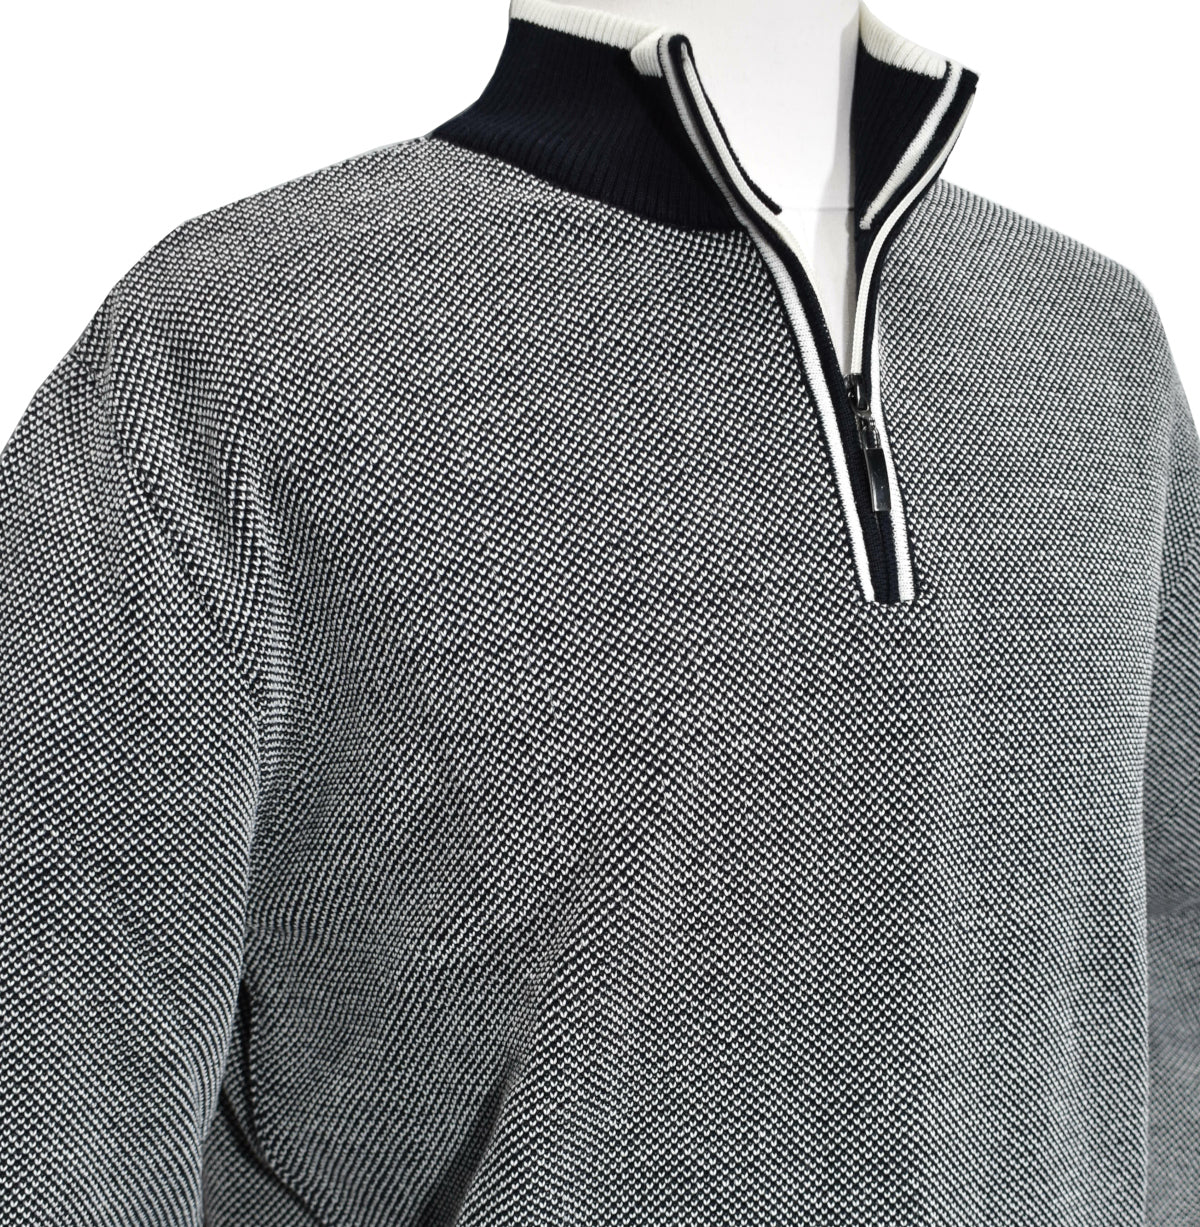 Marcello Quarter Zip  Stay warm and comfortable with the modern style of the 562 Marcello Exclusive Quarter Zip. Crafted with fine two-color yarns knitted together and contrast stitch work, it makes the perfect addition to any wardrobe. Italian merino wool blend ensures a classic style, making it ideal for dress or casual occasions.